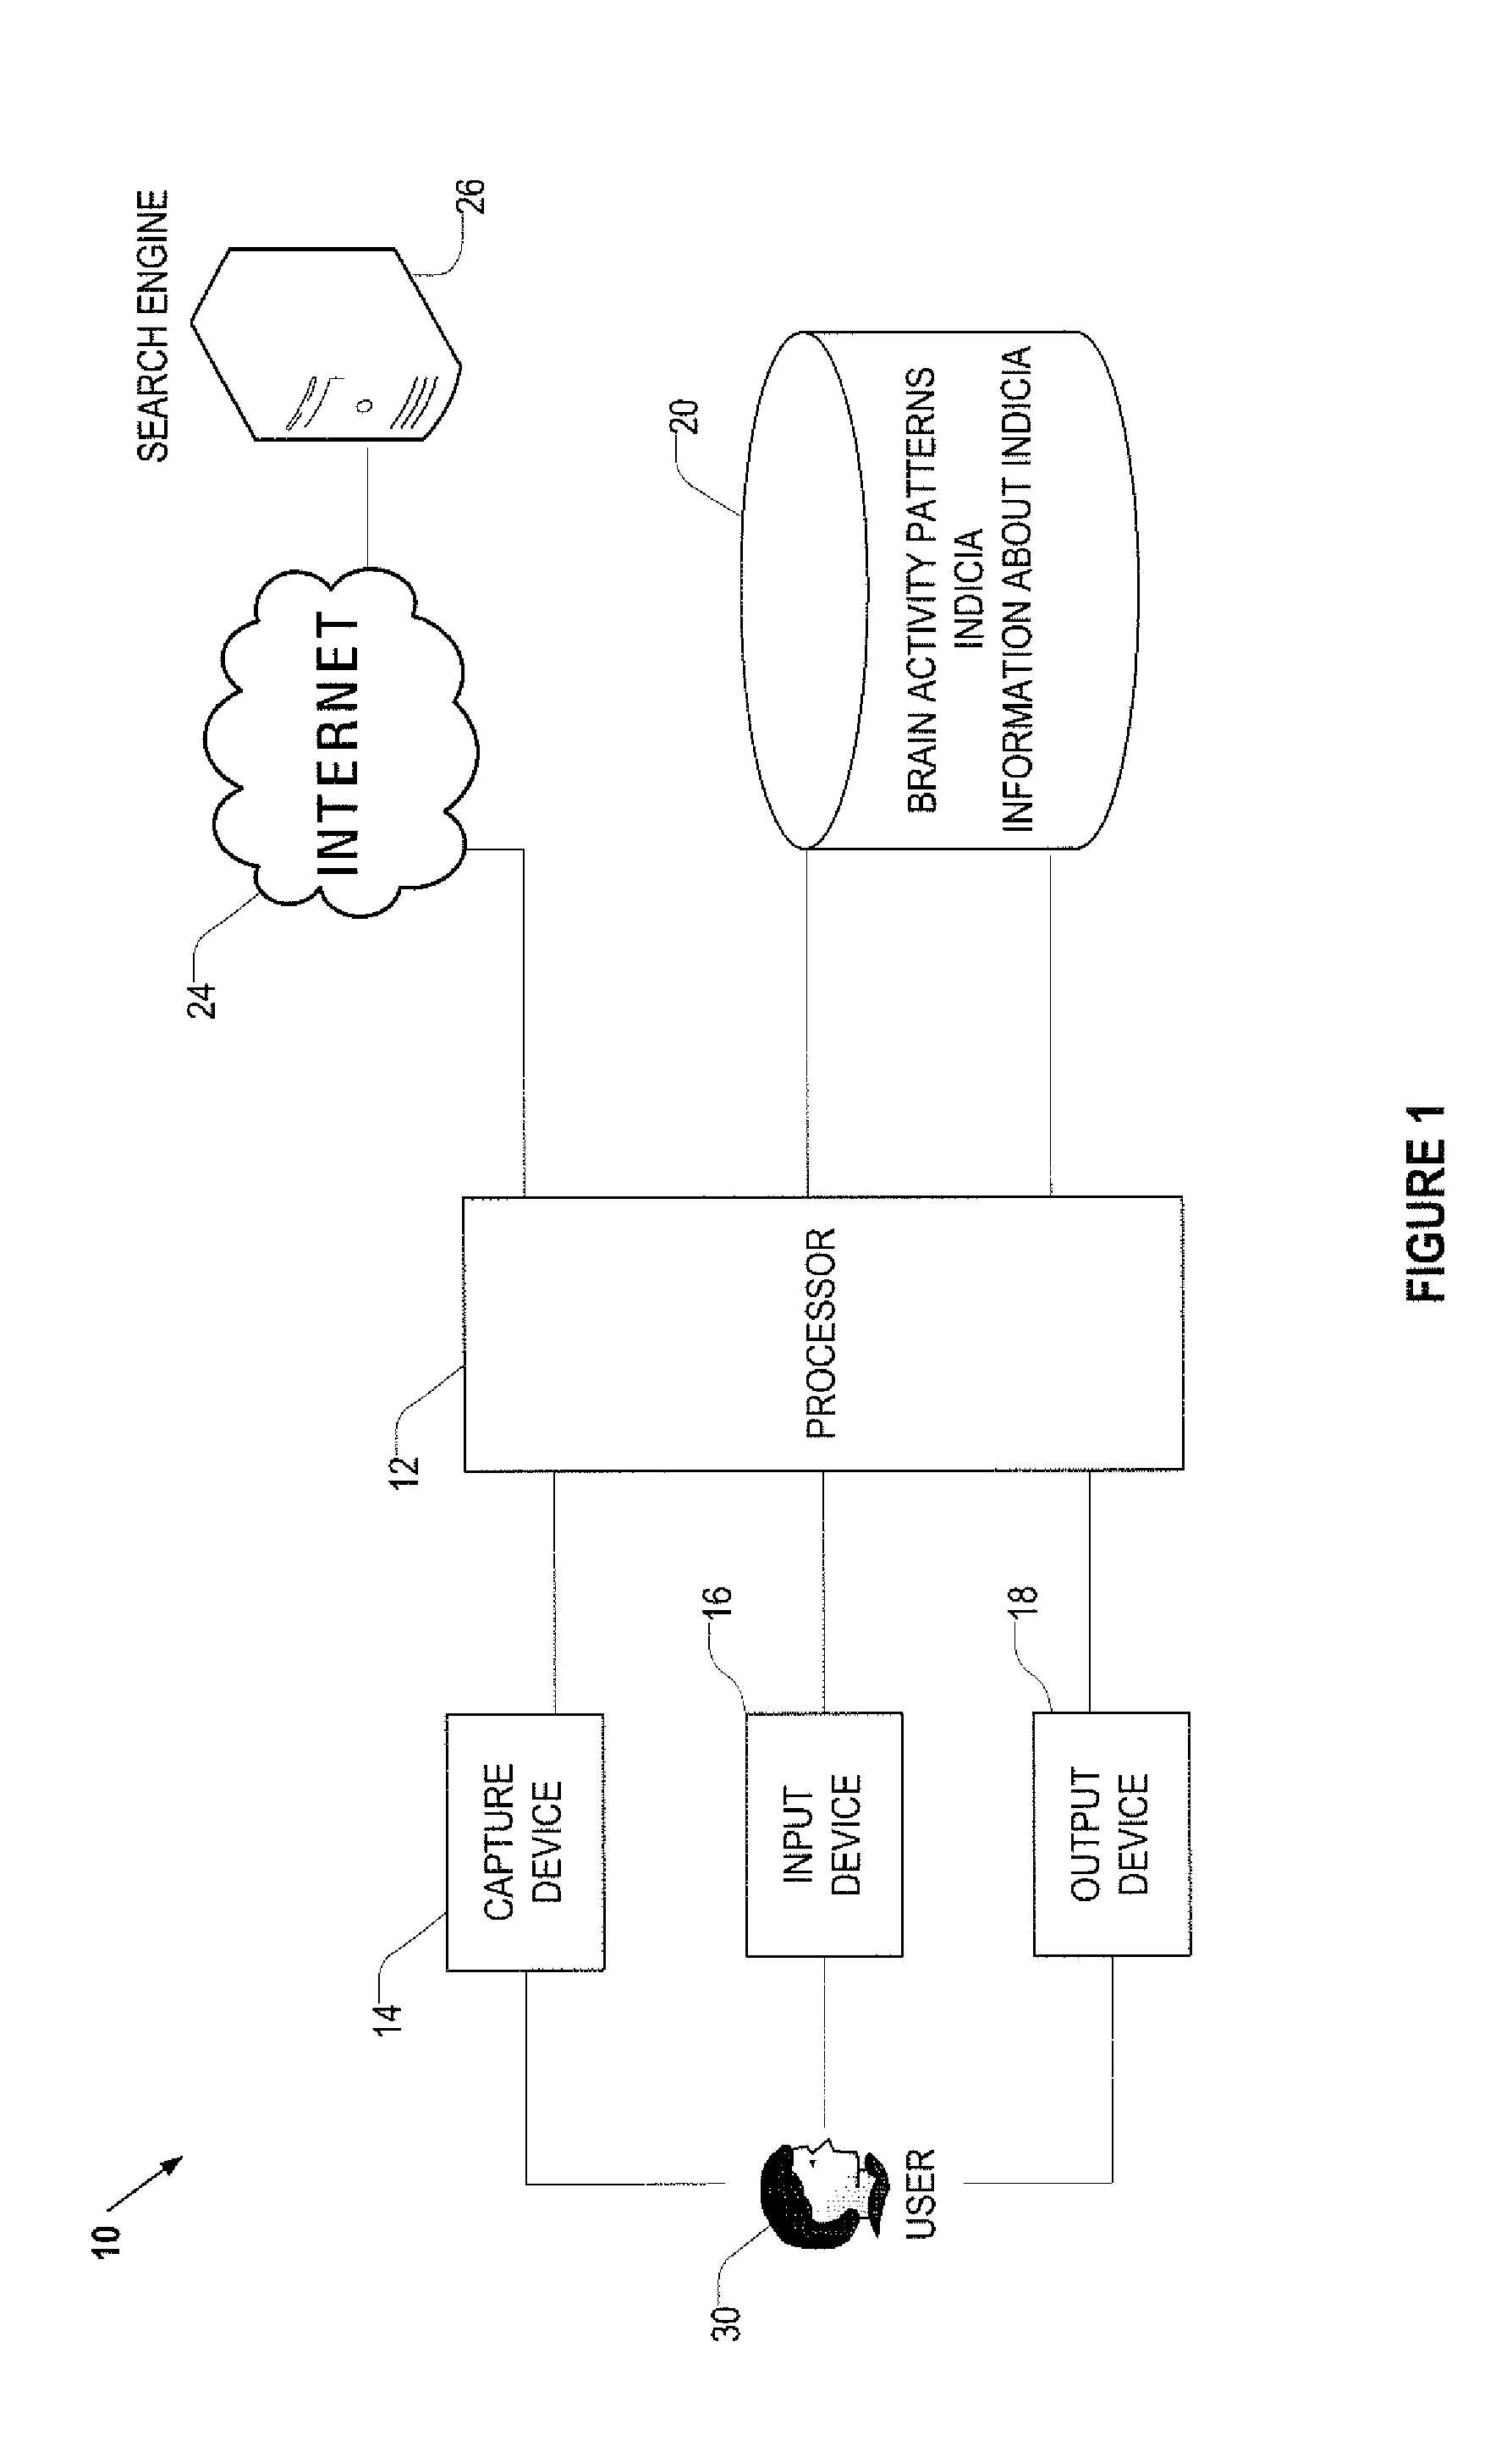 Systems and Methods for Communicating with a Computer Using Brain Activity Patterns